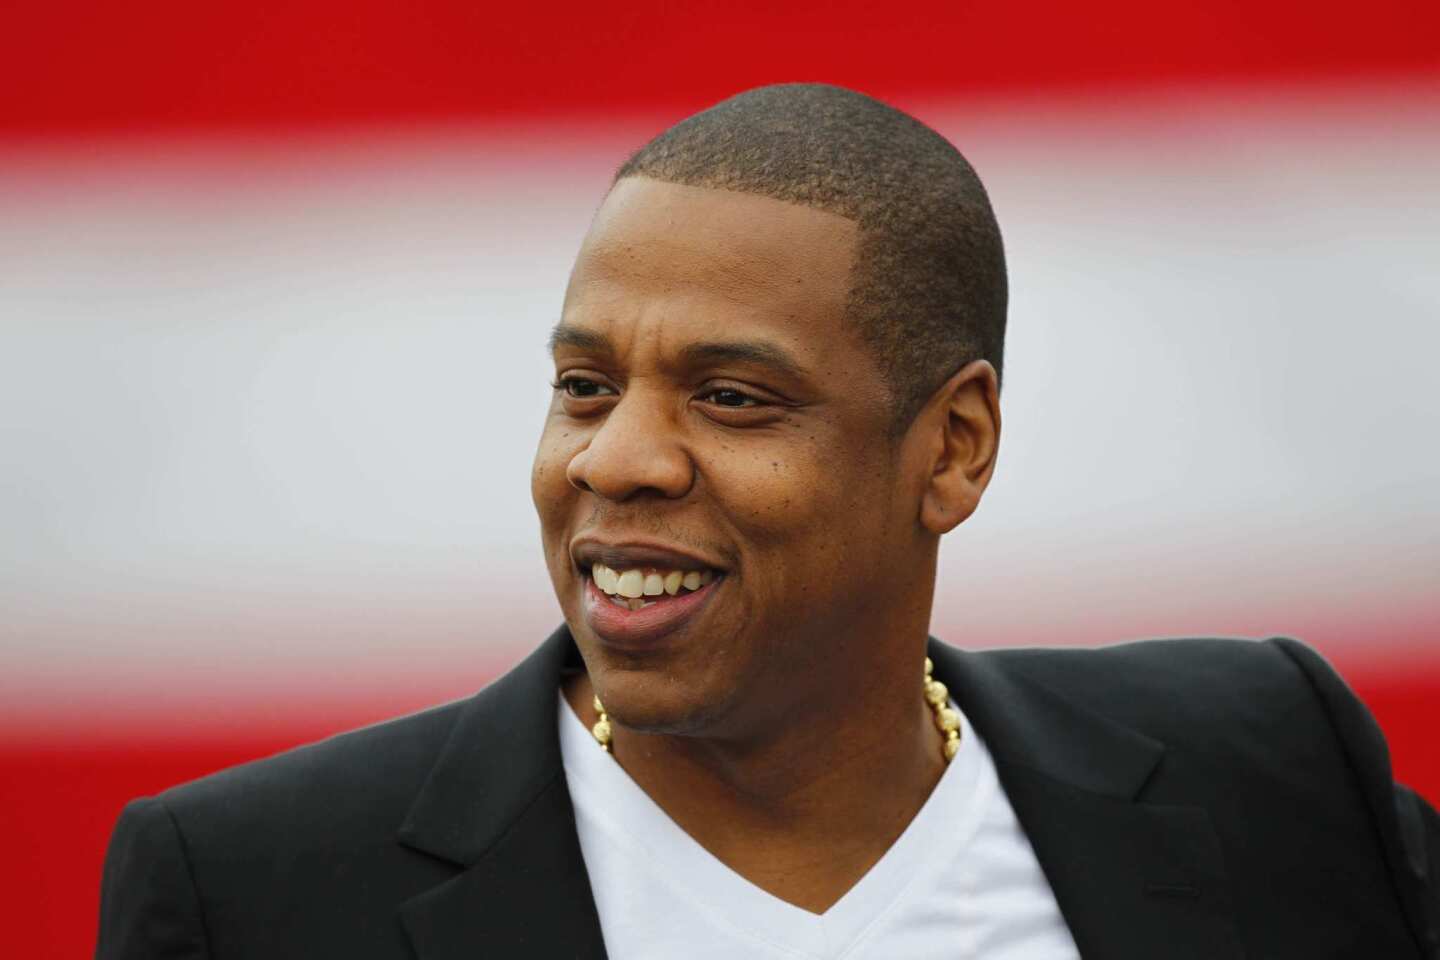 A week after President Barack Obama voiced his support for gay marriage rights and Vice President Joe Biden credited sitcom "Will & Grace" with educating the American populace on gay rights, rapper Jay-Z took a stand on the issue. Saying that denouncing gay rights "is no different than discriminating against blacks," Jay-Z told CNN. "It's discrimination, plain and simple." Jay-Z is one of the most powerful figures in a genre that over the last decade has been shedding its perceived anti-gay tendencies. He said he believed the refusal to allow gay couples to wed is "holding the country back." "What people do in their own homes is their business and you can choose to love whoever you love," Jay-Z told CNN. "That's their business."